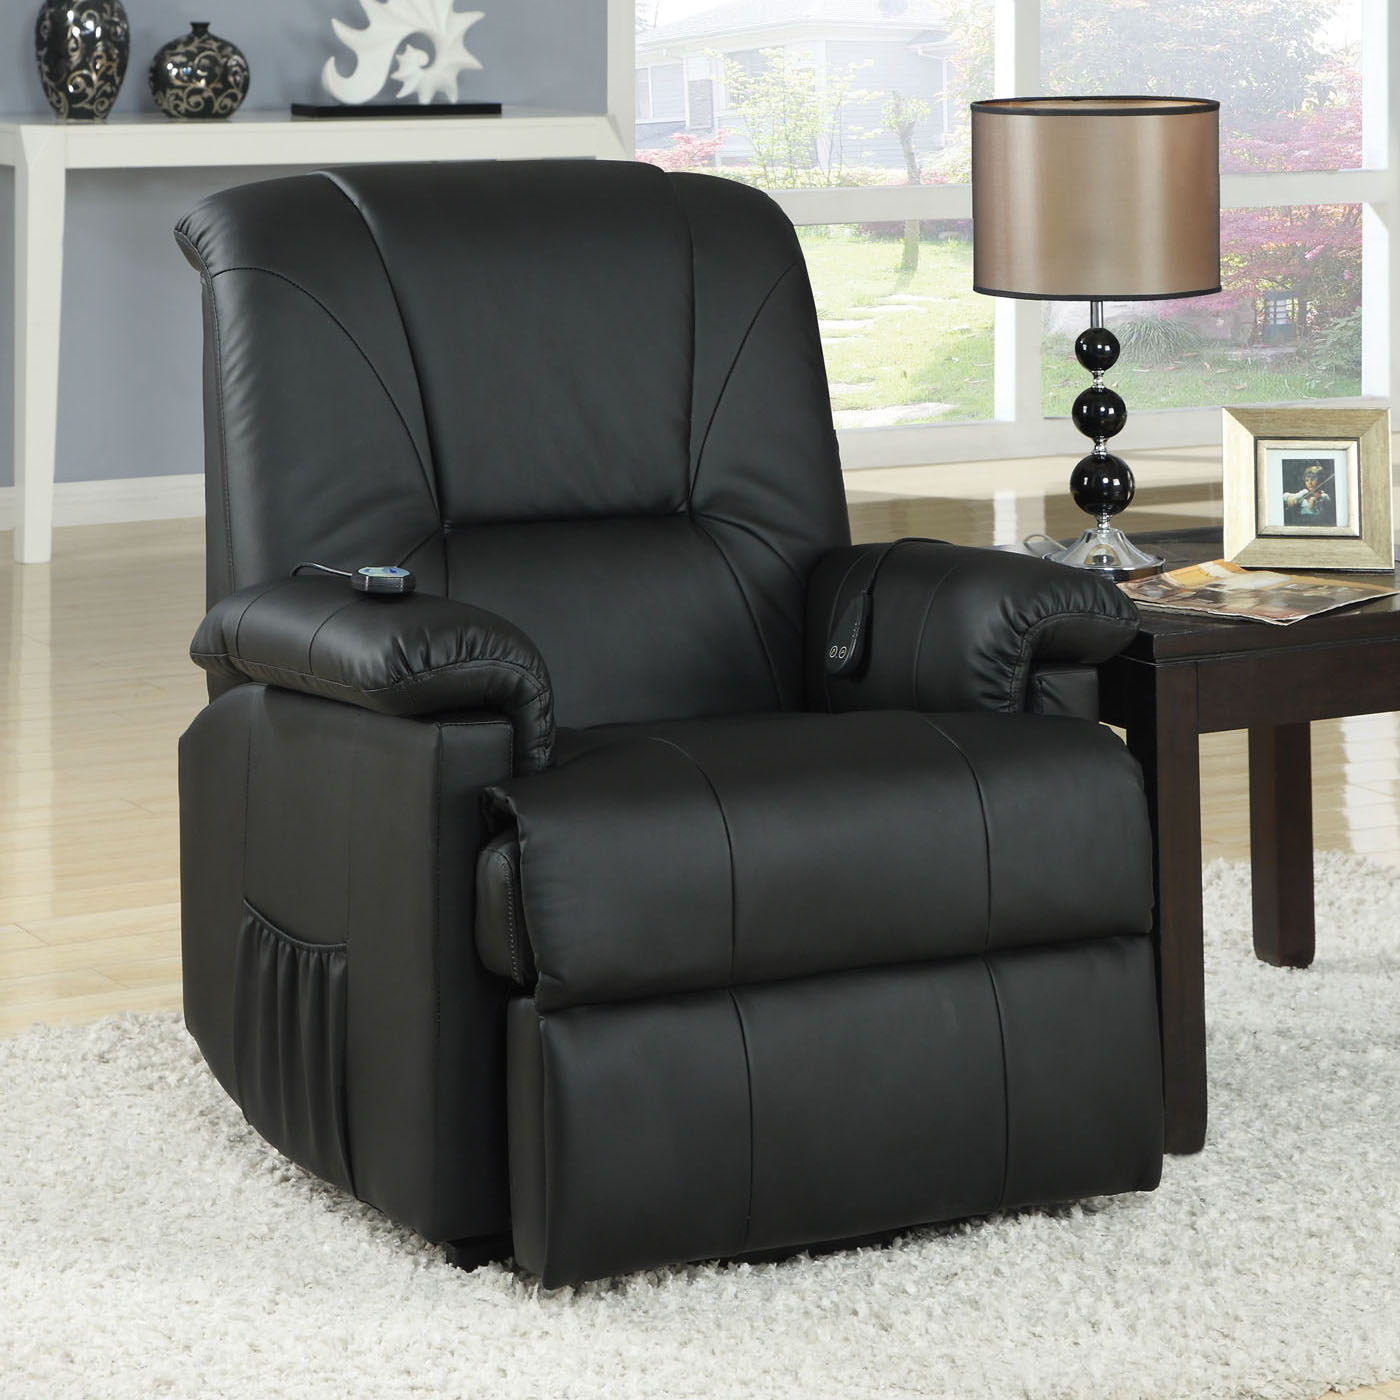 32" X 33" X 40" Black Pu Recliner With Power Lift And Massage